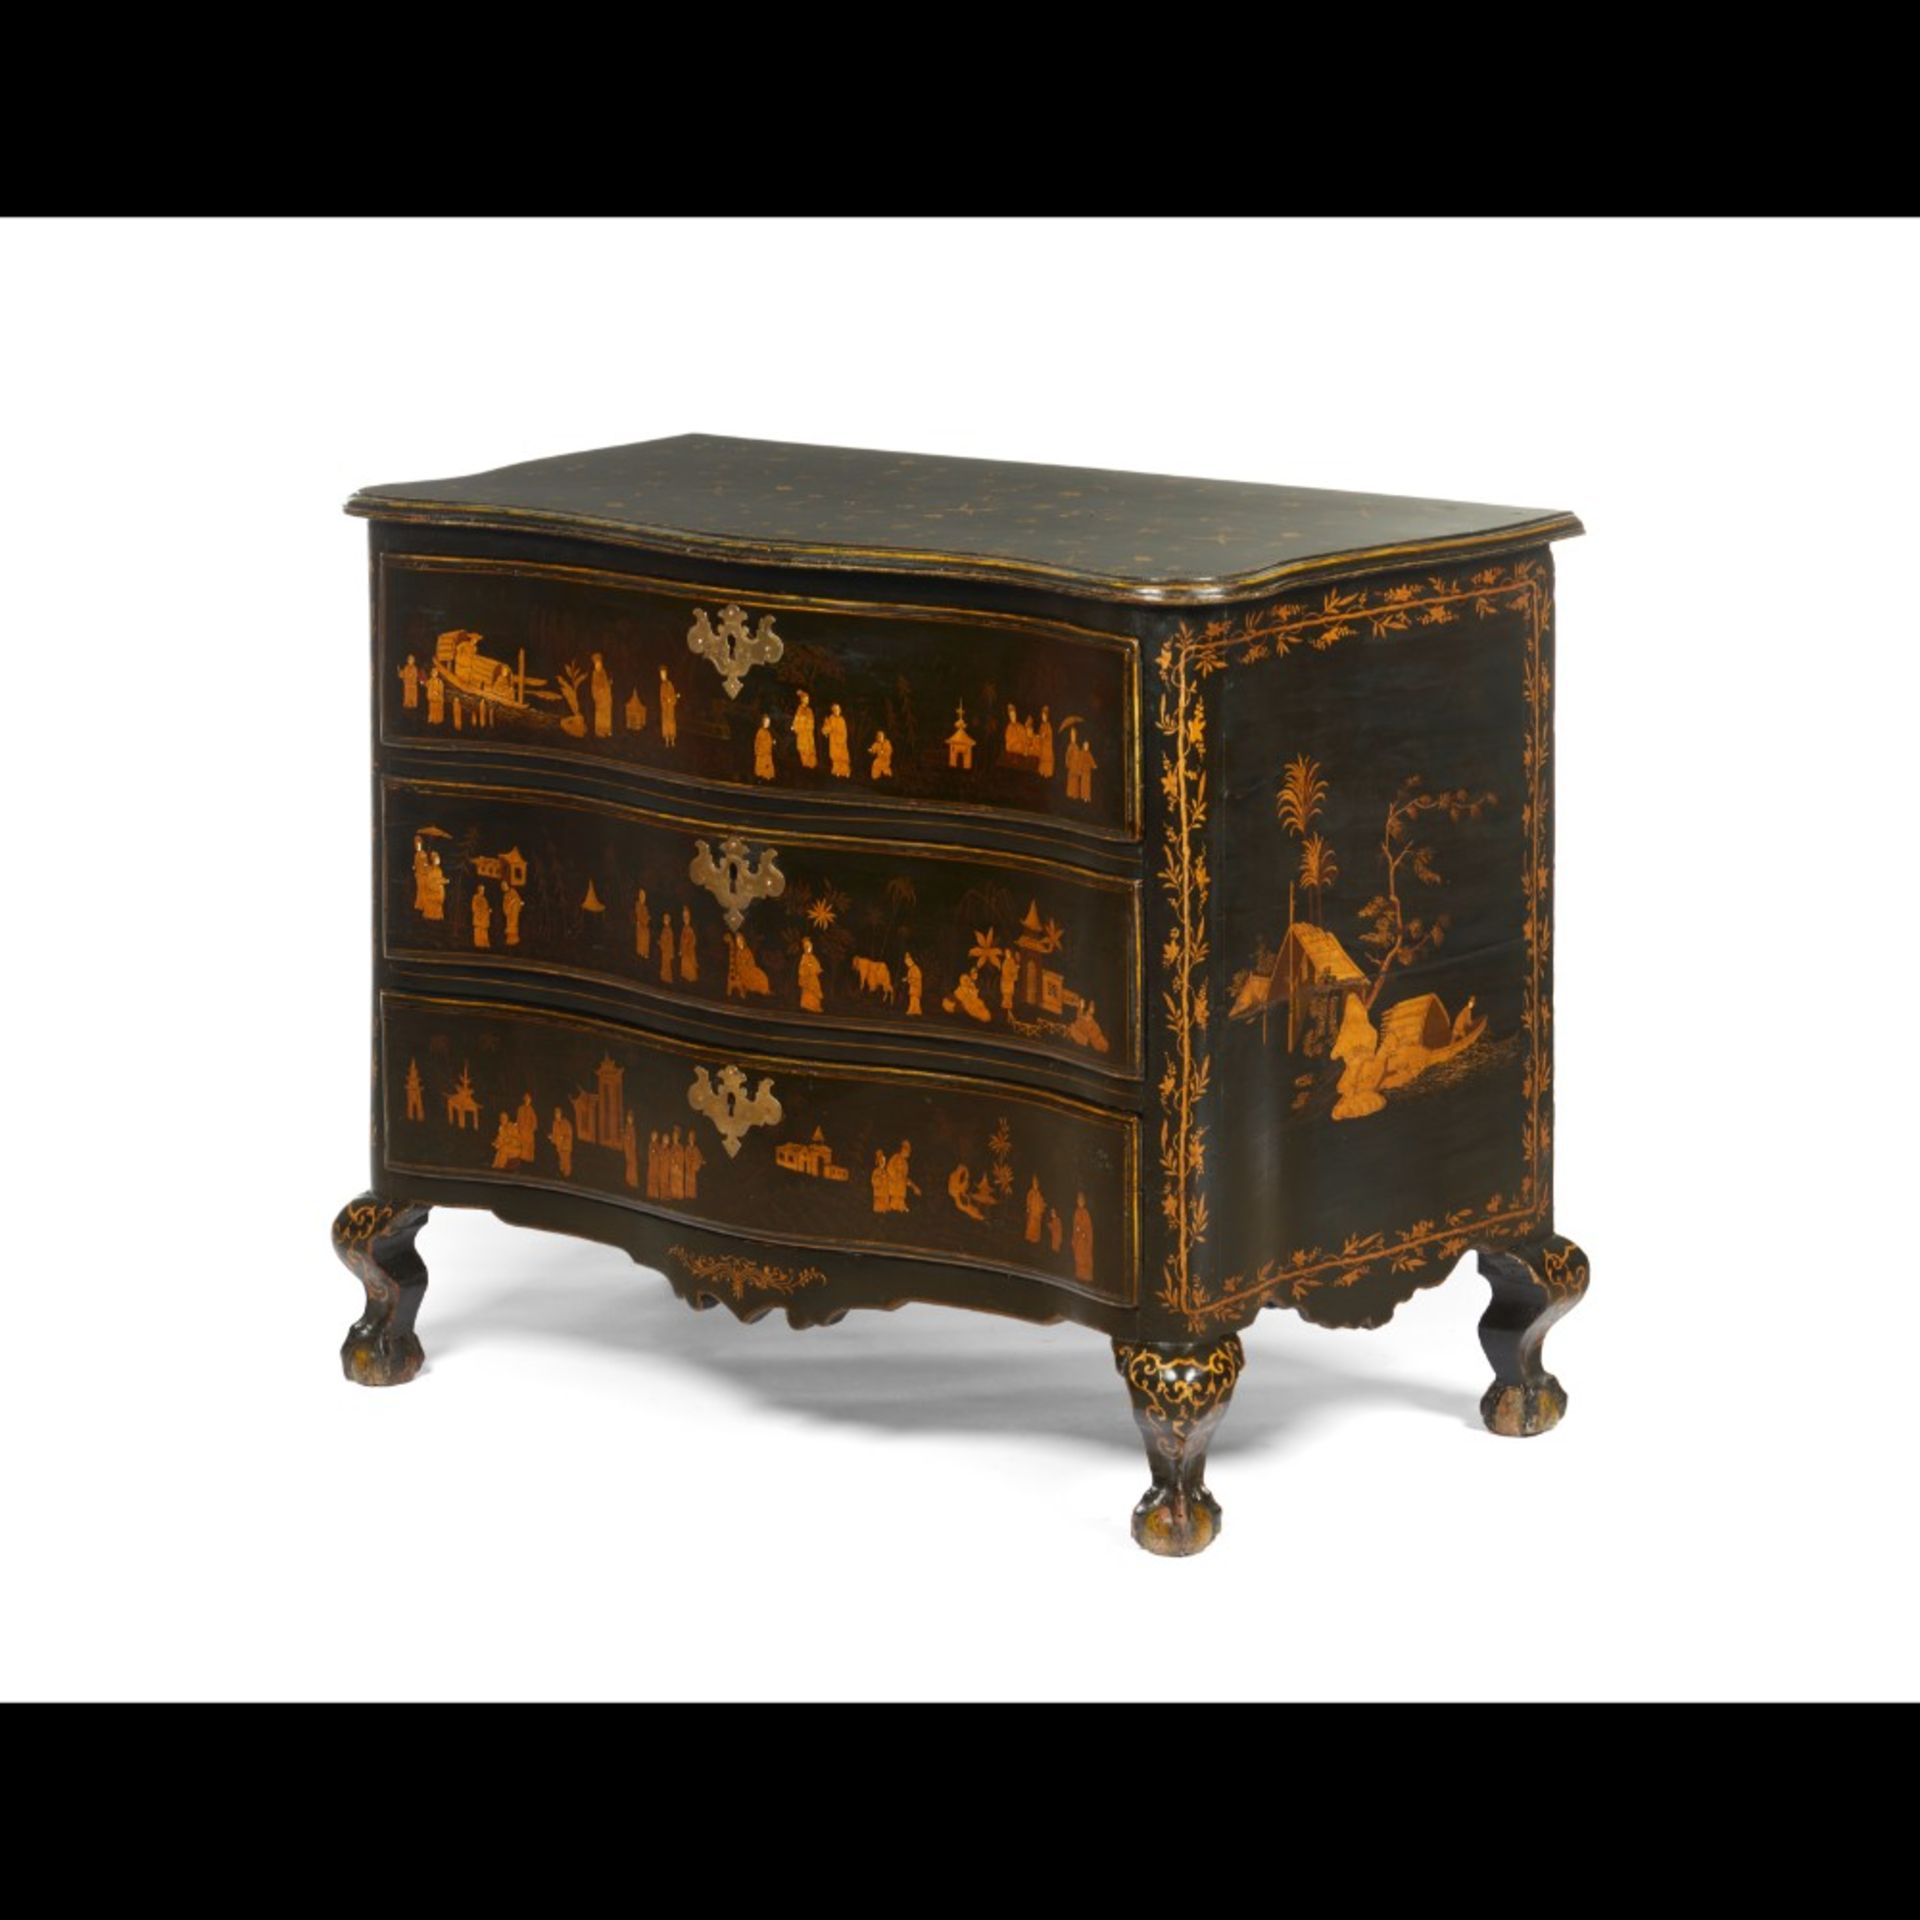  A Chippendale style chest of drawers